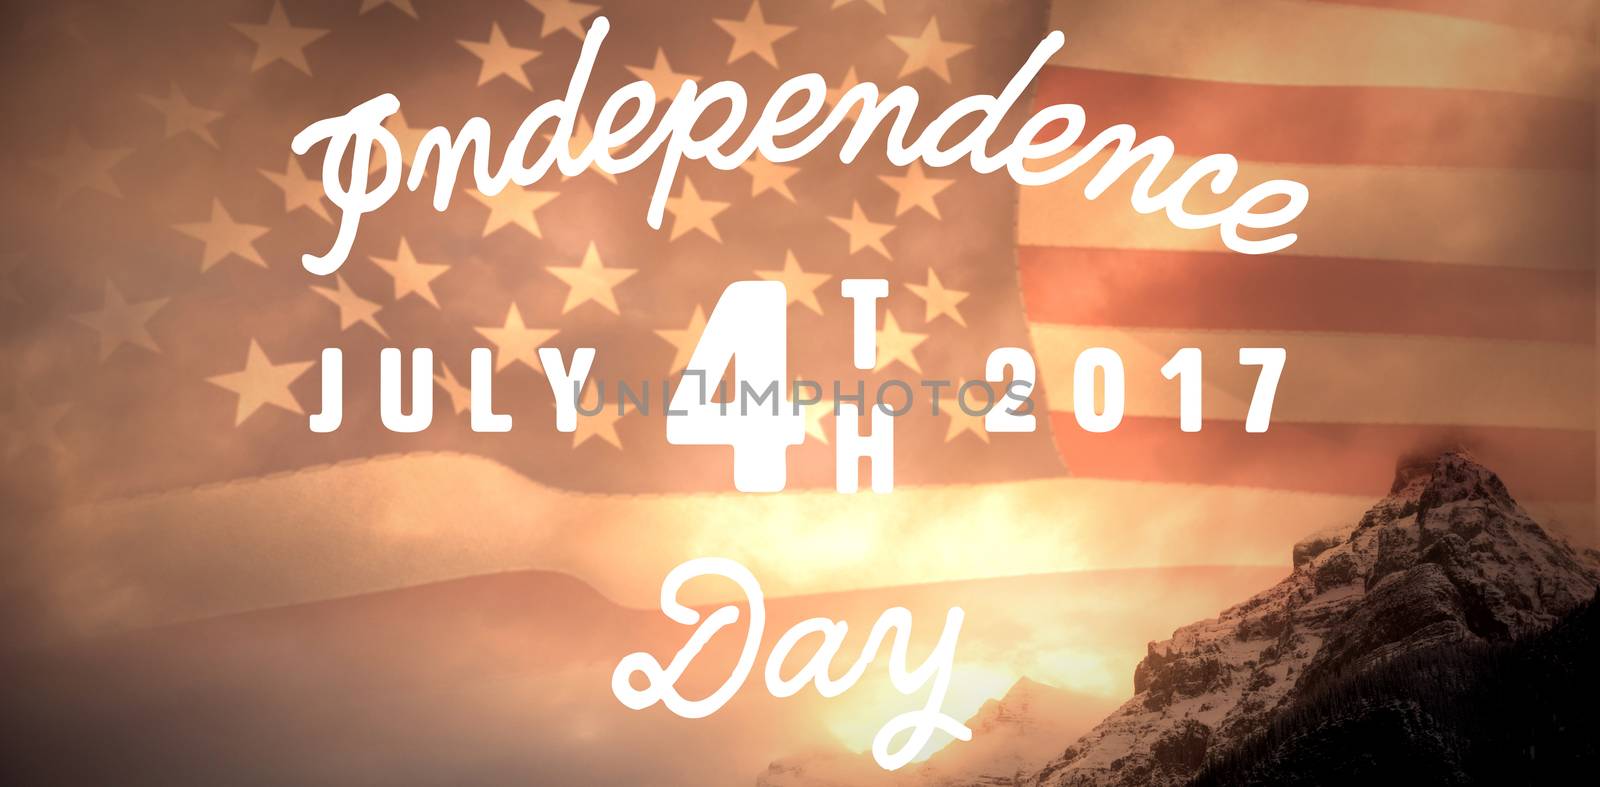 Digitally generated image of happy 4th of july message against united states of america flag